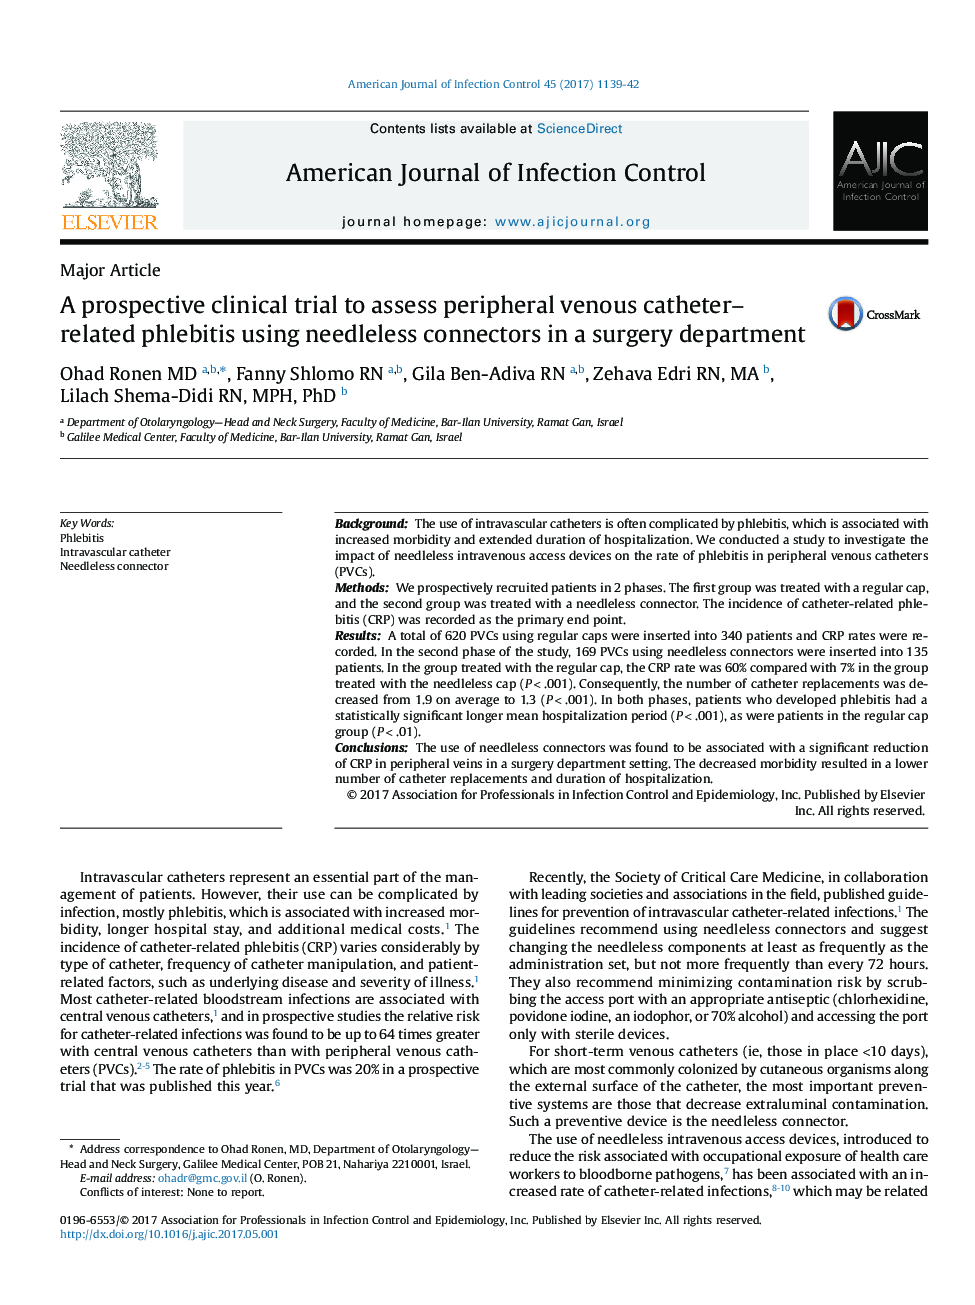 A prospective clinical trial to assess peripheral venous catheter-related phlebitis using needleless connectors in a surgery department